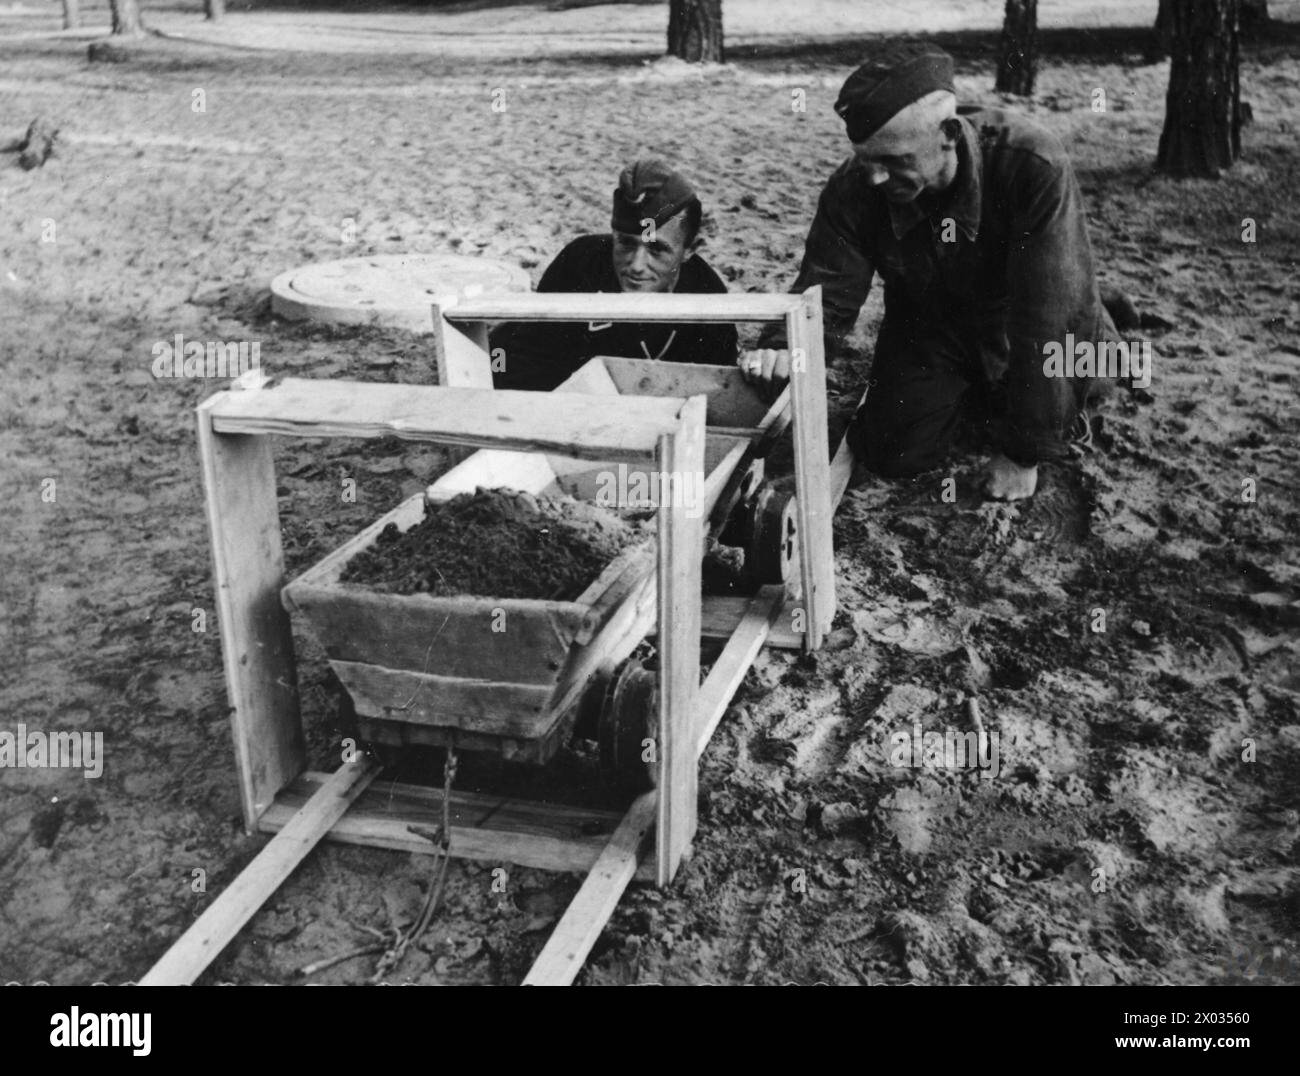 THE GREAT ESCAPE, MARCH 1944 - They put it on rails in two of the shoving frames which they re-assembled upside down - the box frames were narrower at the top. Corporal Karl Greise, one of the German guards known as 'Rubberneck', and Sergeant-Major Hermann Glemnitz, the senior member of the German guard, demonstrating a cart used for removing earth from the 'Harry' escape tunnel at Stalag Luft III, Sagan. Photograph probably taken in late March 1944  German Air Force, Glemnitz, Hermann, Greise, Karl Stock Photo